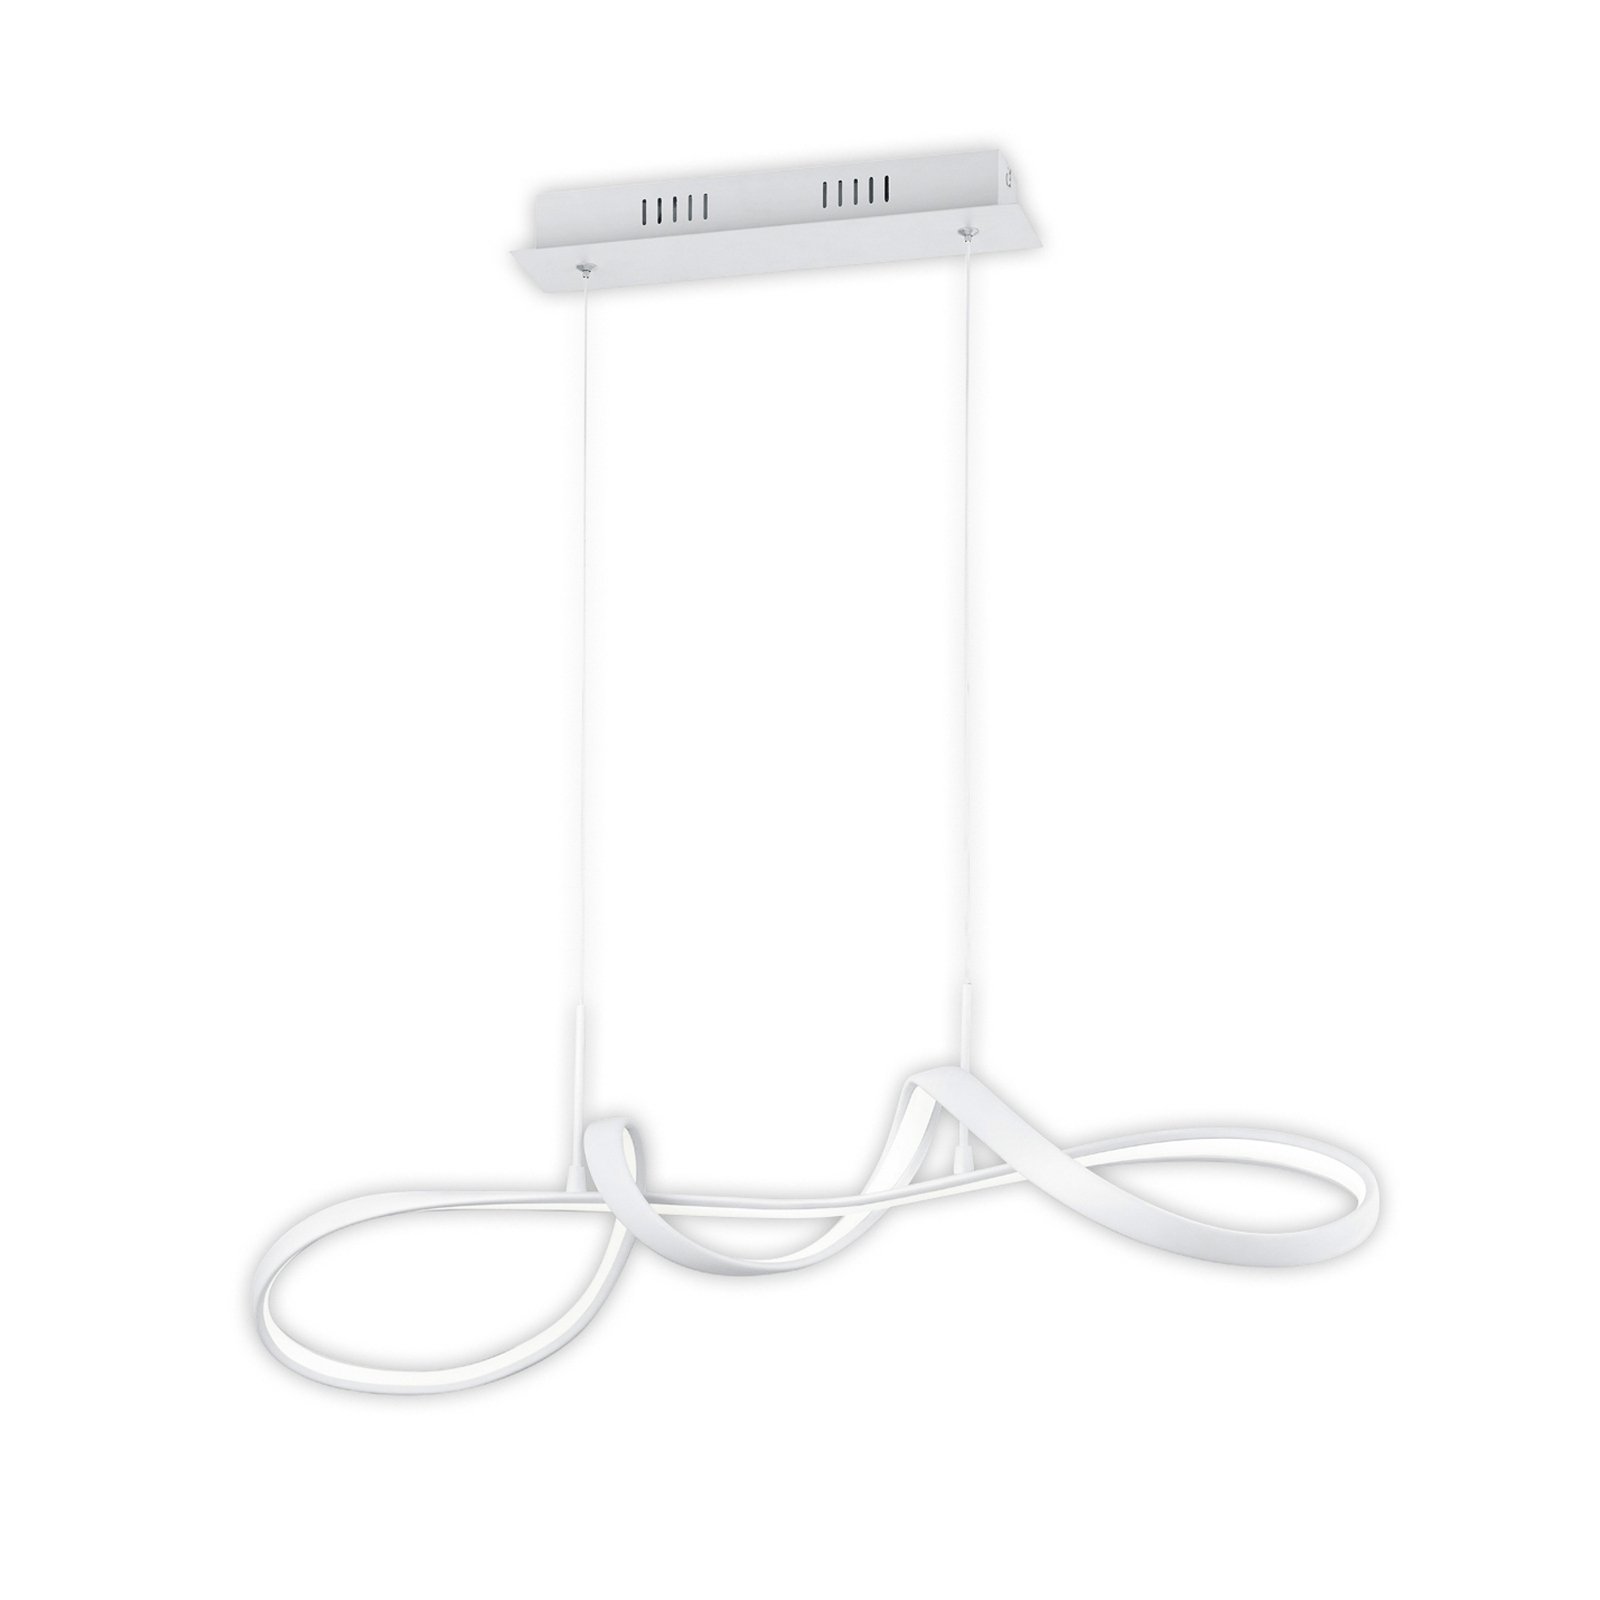 LED hanglamp Perugia met switch-dimmer, wit